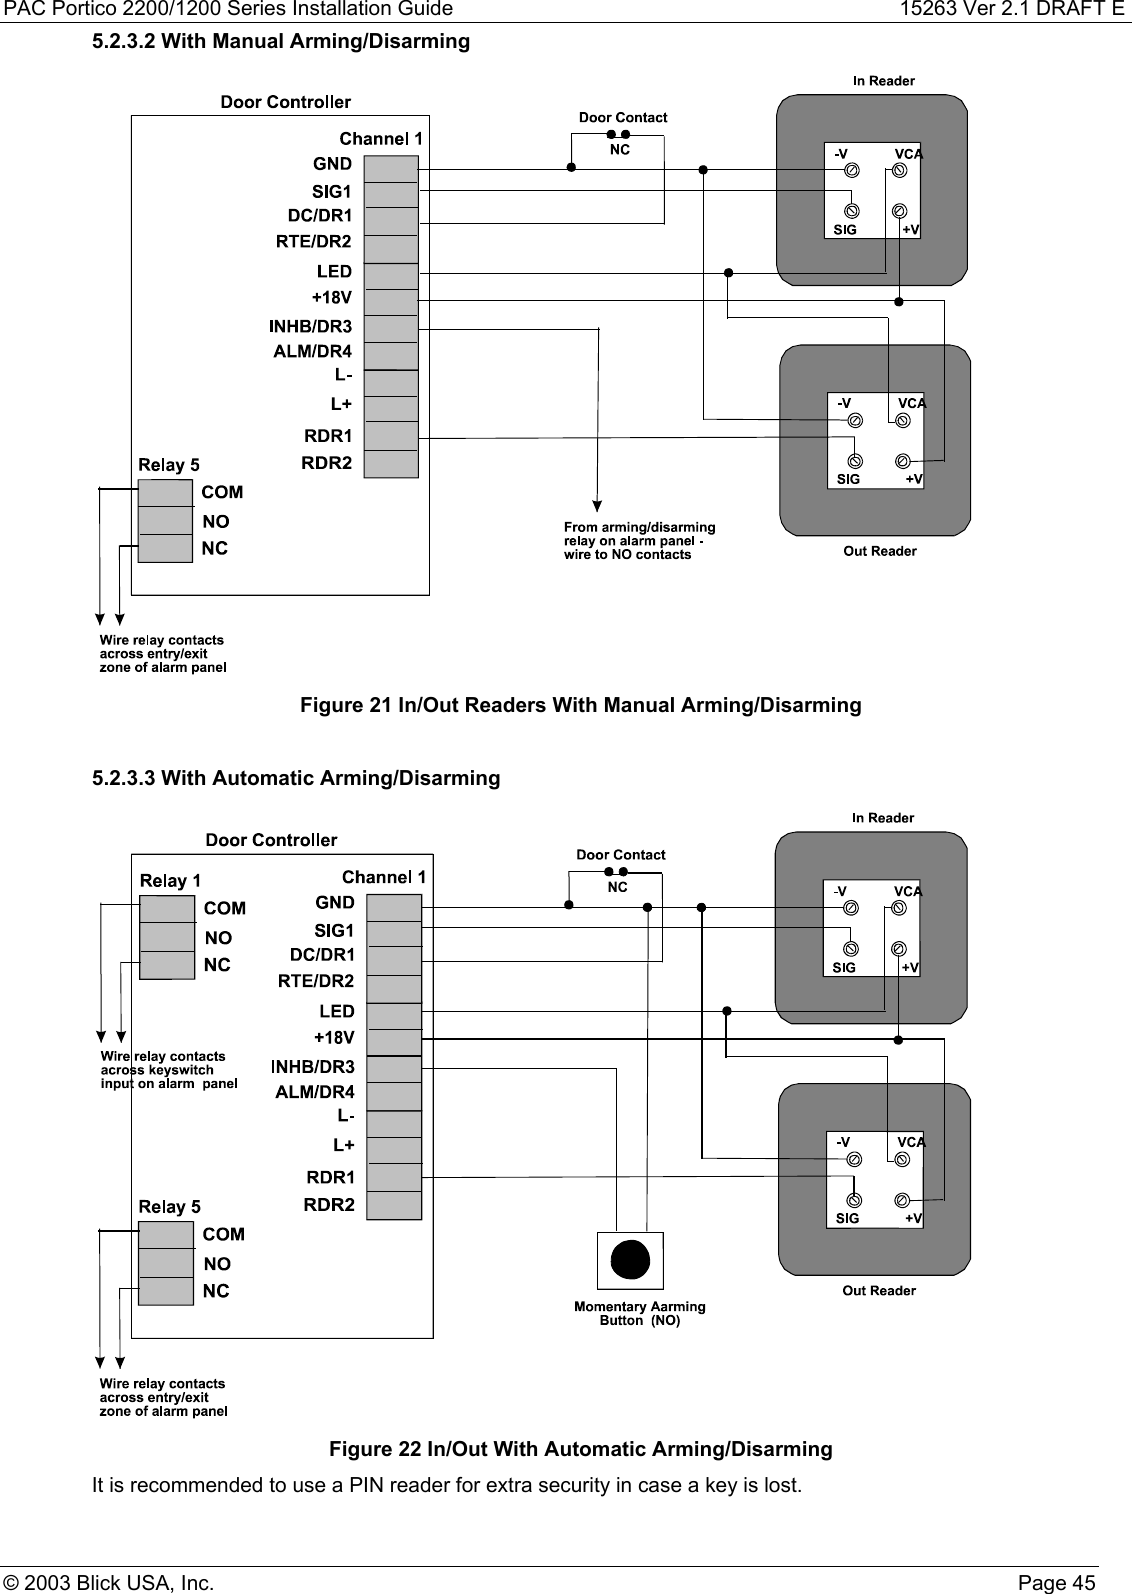 PAC Portico 2200/1200 Series Installation Guide 15263 Ver 2.1 DRAFT E© 2003 Blick USA, Inc. Page 455.2.3.2 With Manual Arming/DisarmingFigure 21 In/Out Readers With Manual Arming/Disarming5.2.3.3 With Automatic Arming/DisarmingFigure 22 In/Out With Automatic Arming/DisarmingIt is recommended to use a PIN reader for extra security in case a key is lost.